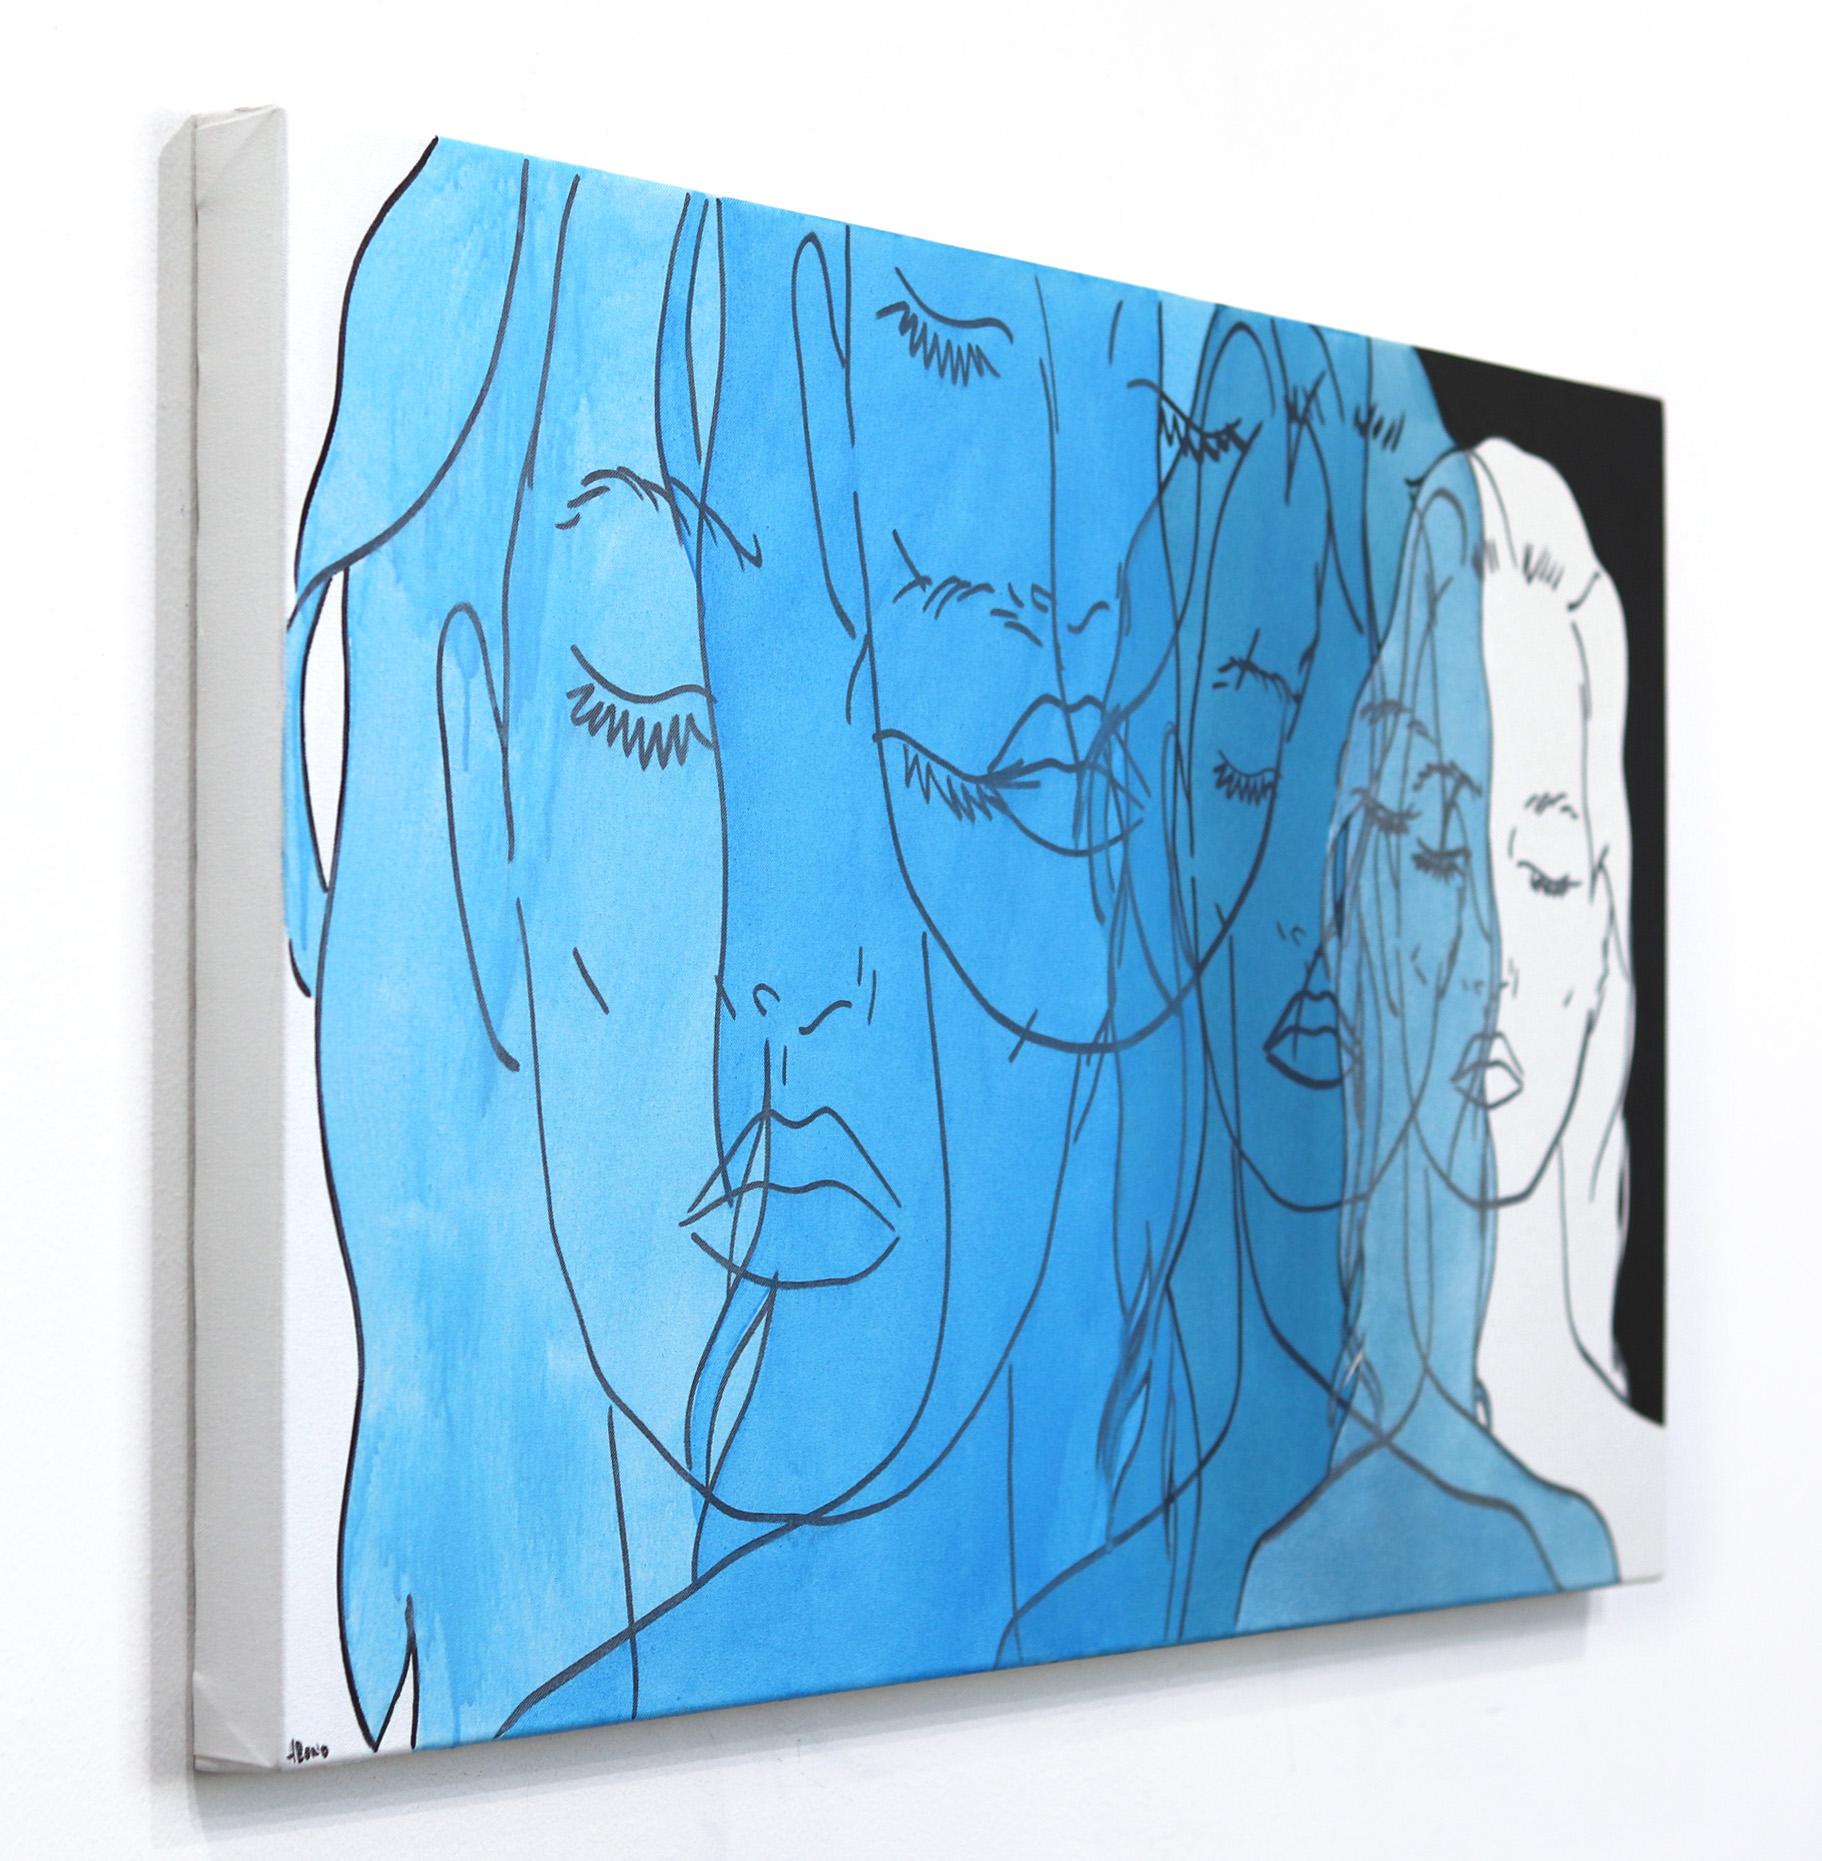 In bold, acrylic line paintings, US artist Hilary Bond depicts the heads and torsos of women, often repeating the image in overlapping compositions.  Her contemporary groups of pop culture portraits and figures are creatively rendered in a palette